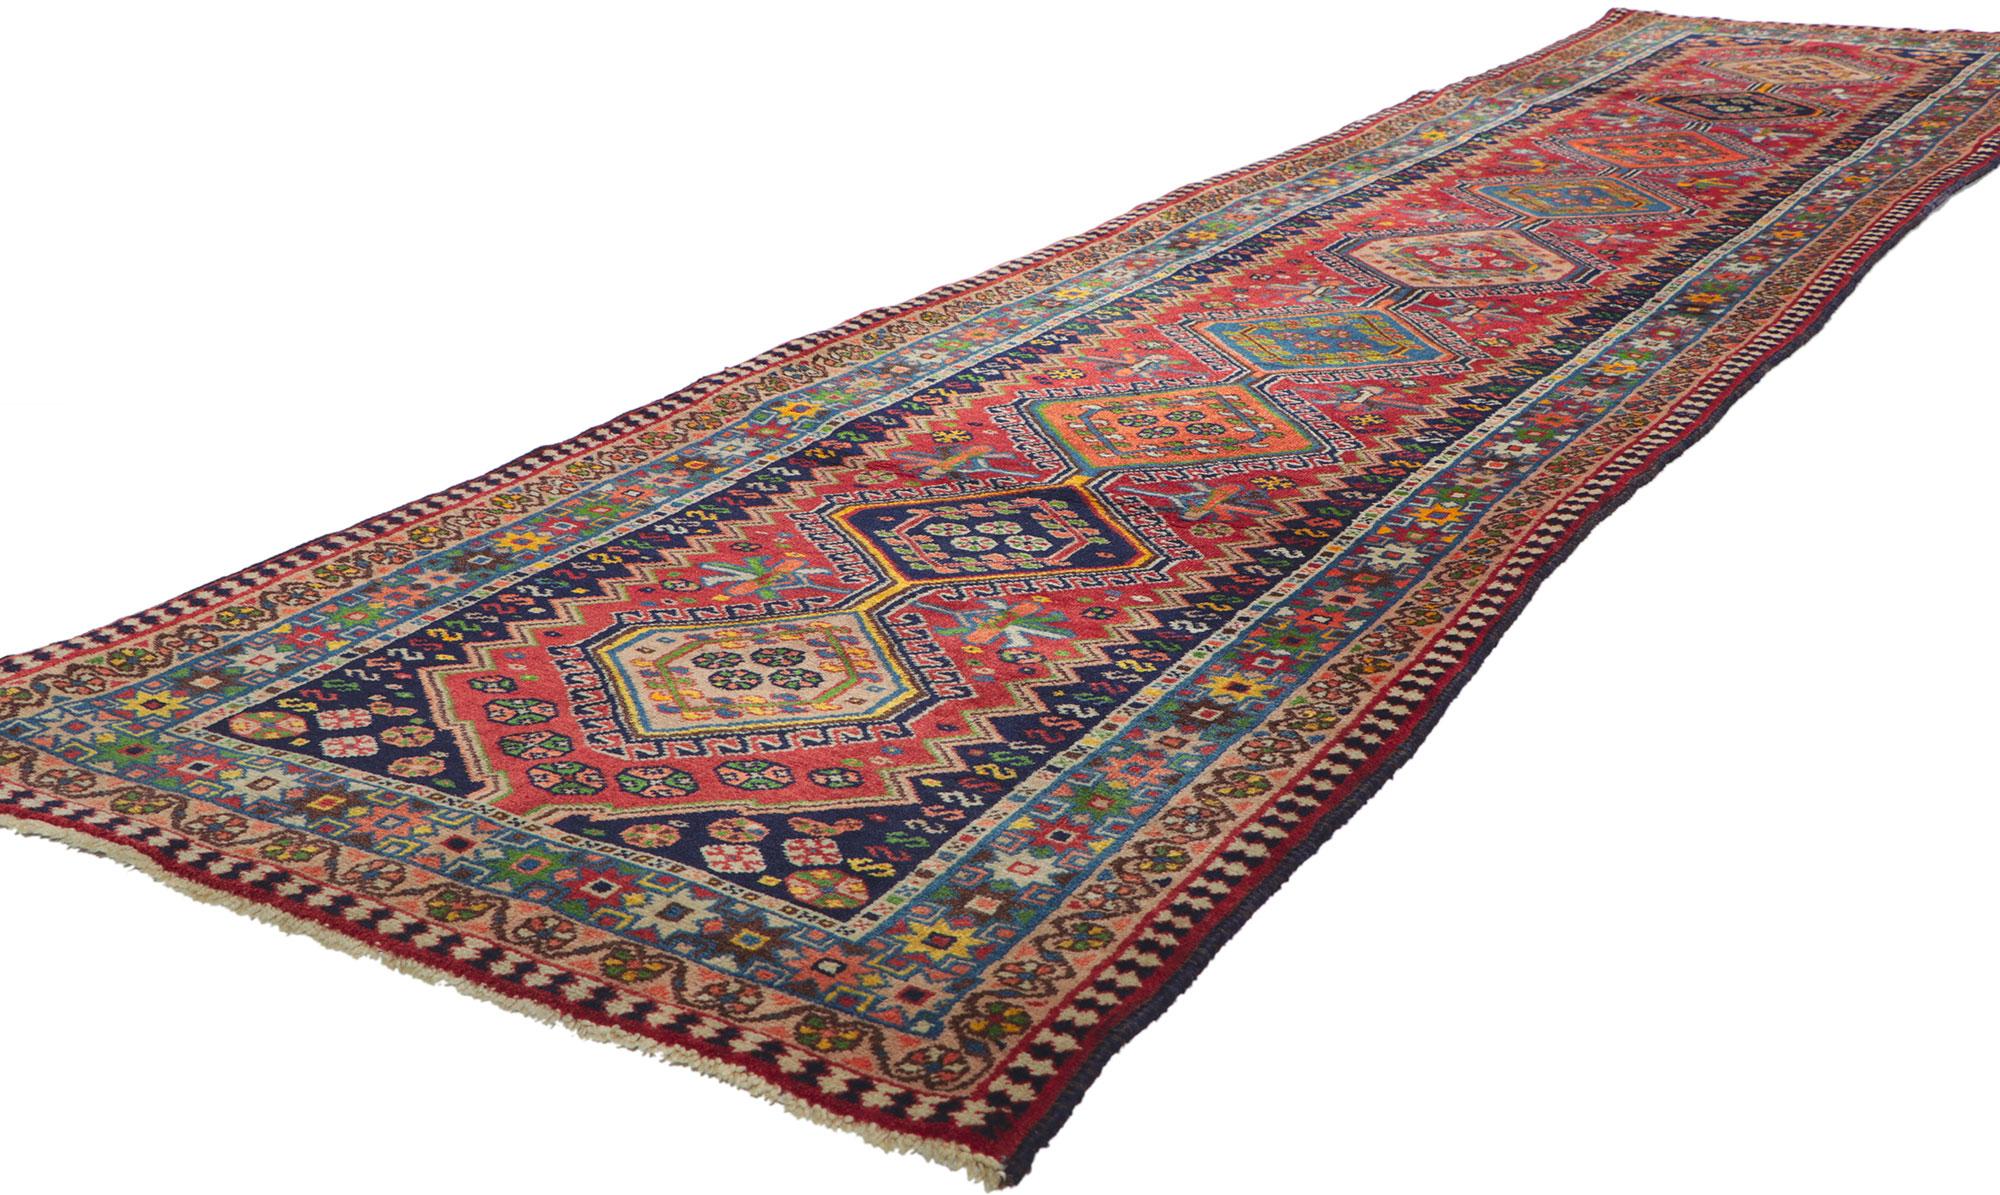 61074 vintage Persian Shiraz Hallway rug Runner, 02'06 x 11'02. Full of tiny details and a bold expressive design combined with tribal style, this hand-knotted wool vintage Persian Shiraz runner is a captivating vision of woven beauty. Perfect for a